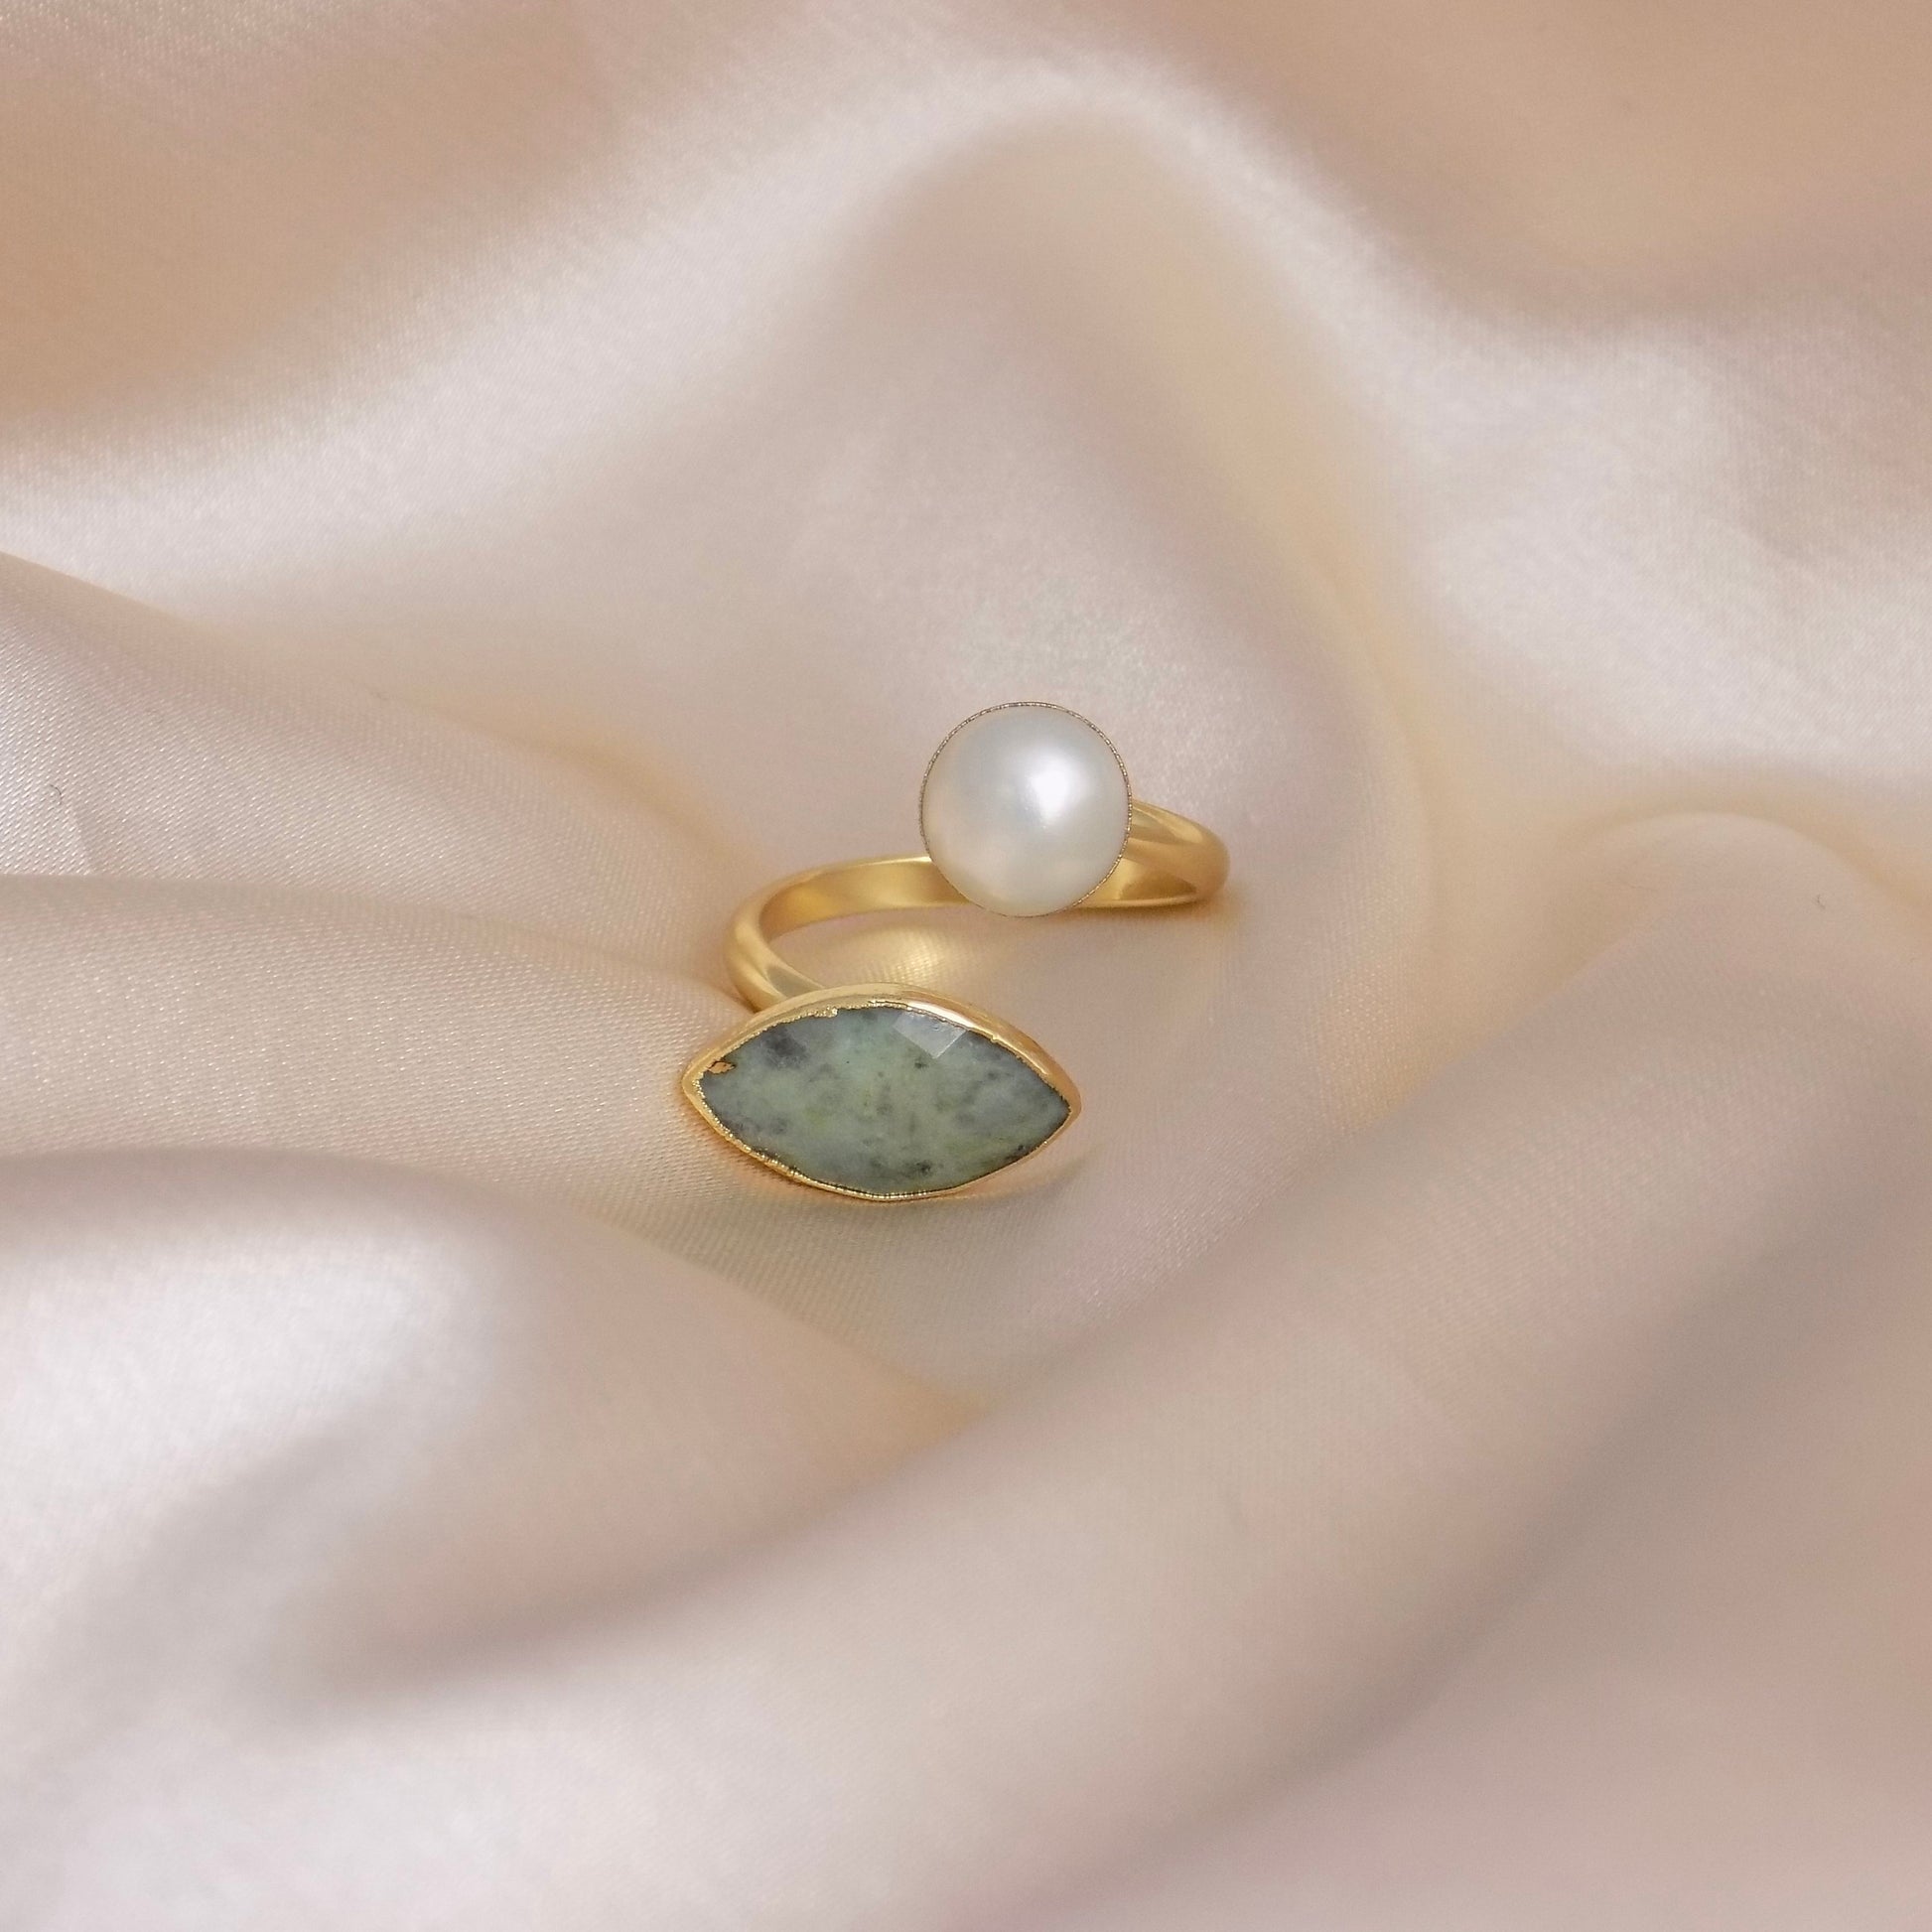 Green Jasper Ring Adjustable, Freshwater Pearl Ring Gold Plated, Raw Crystals Dual Gemstone Gold, Unique Gifts For Her, M6-754